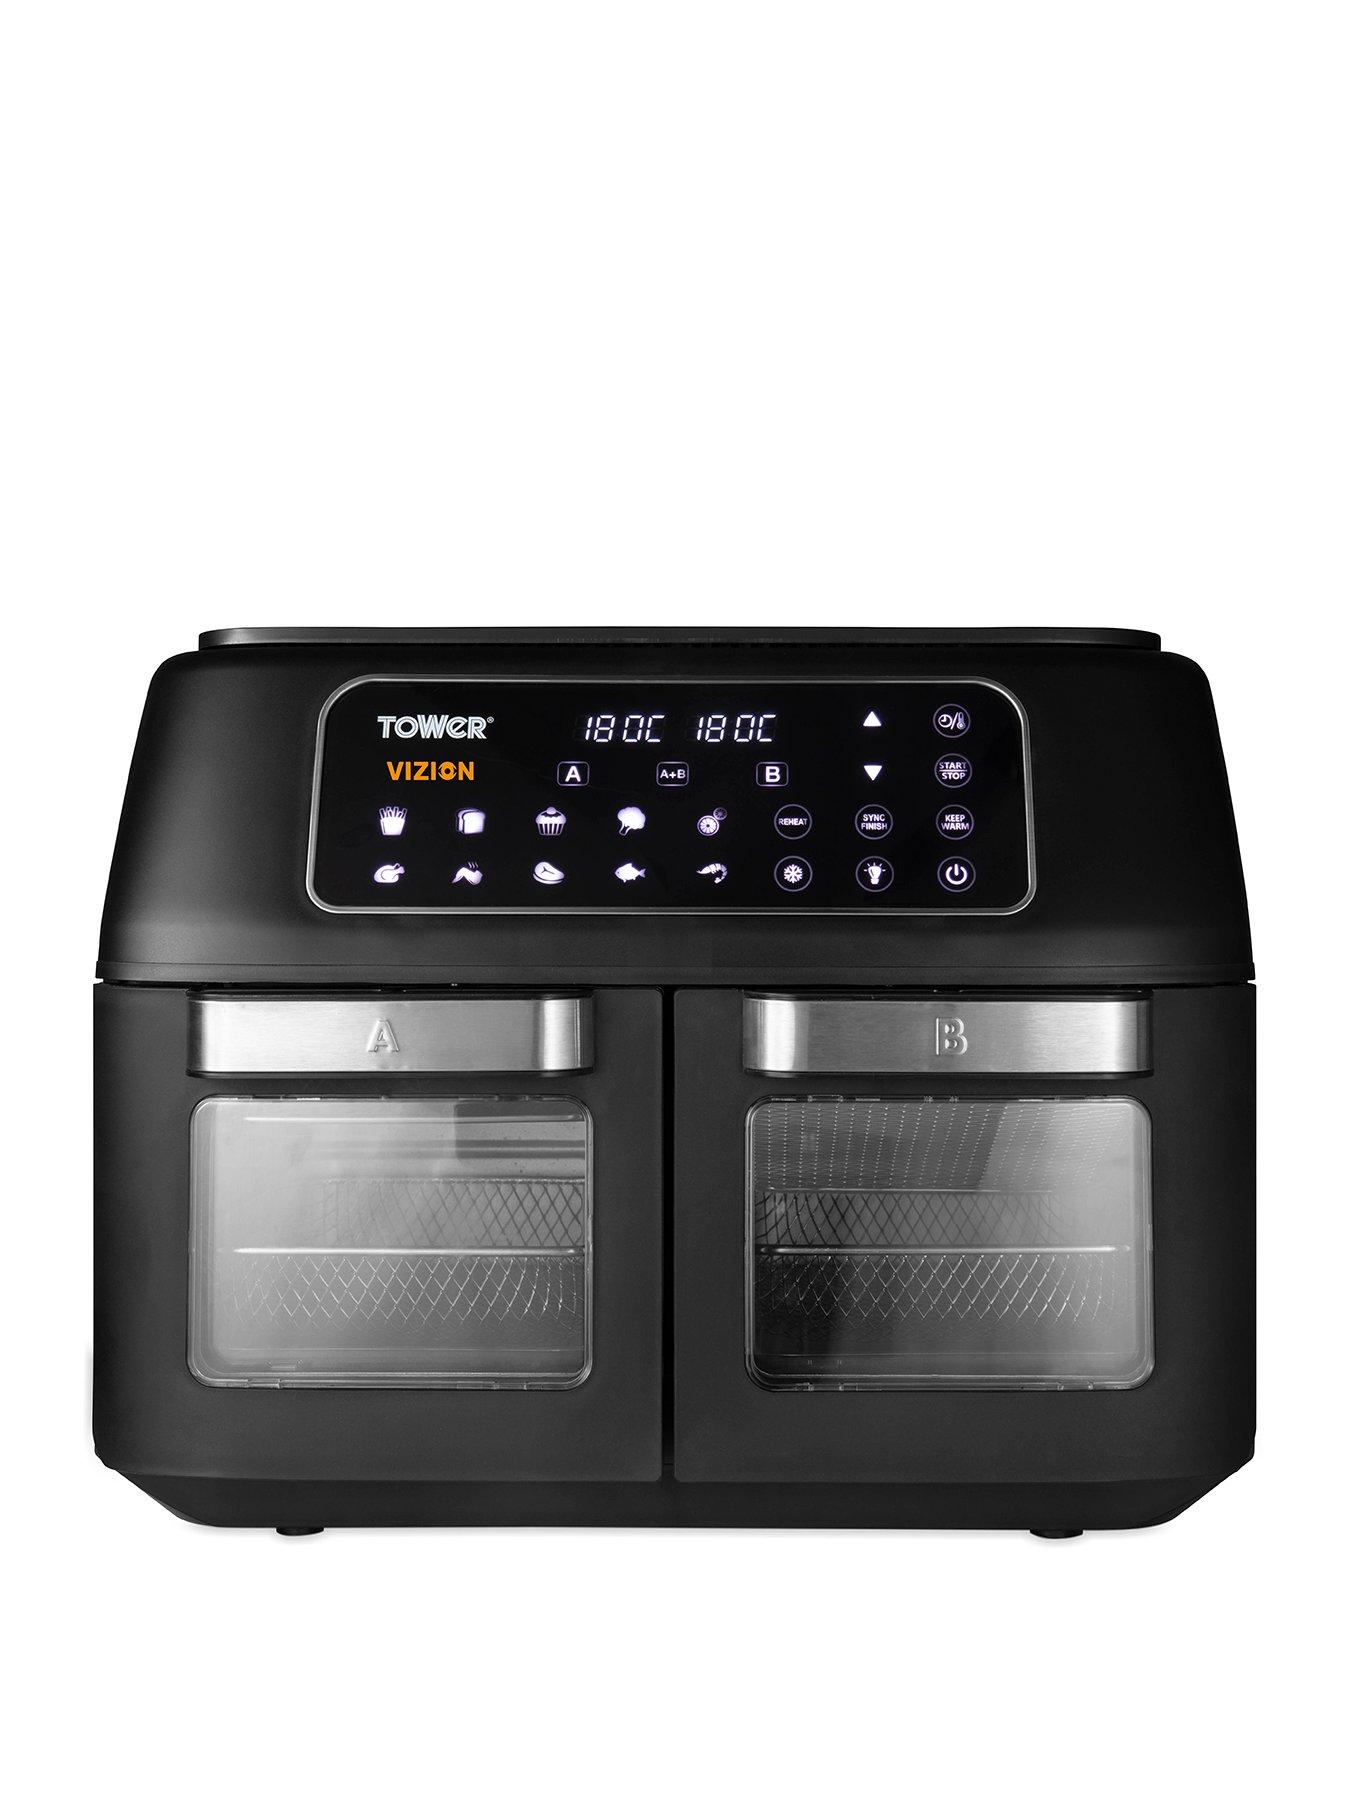 Tower T17102 Vortx Vizion Dual Compartment Air Fryer Oven With Digital Touch Panel, 11L, Black